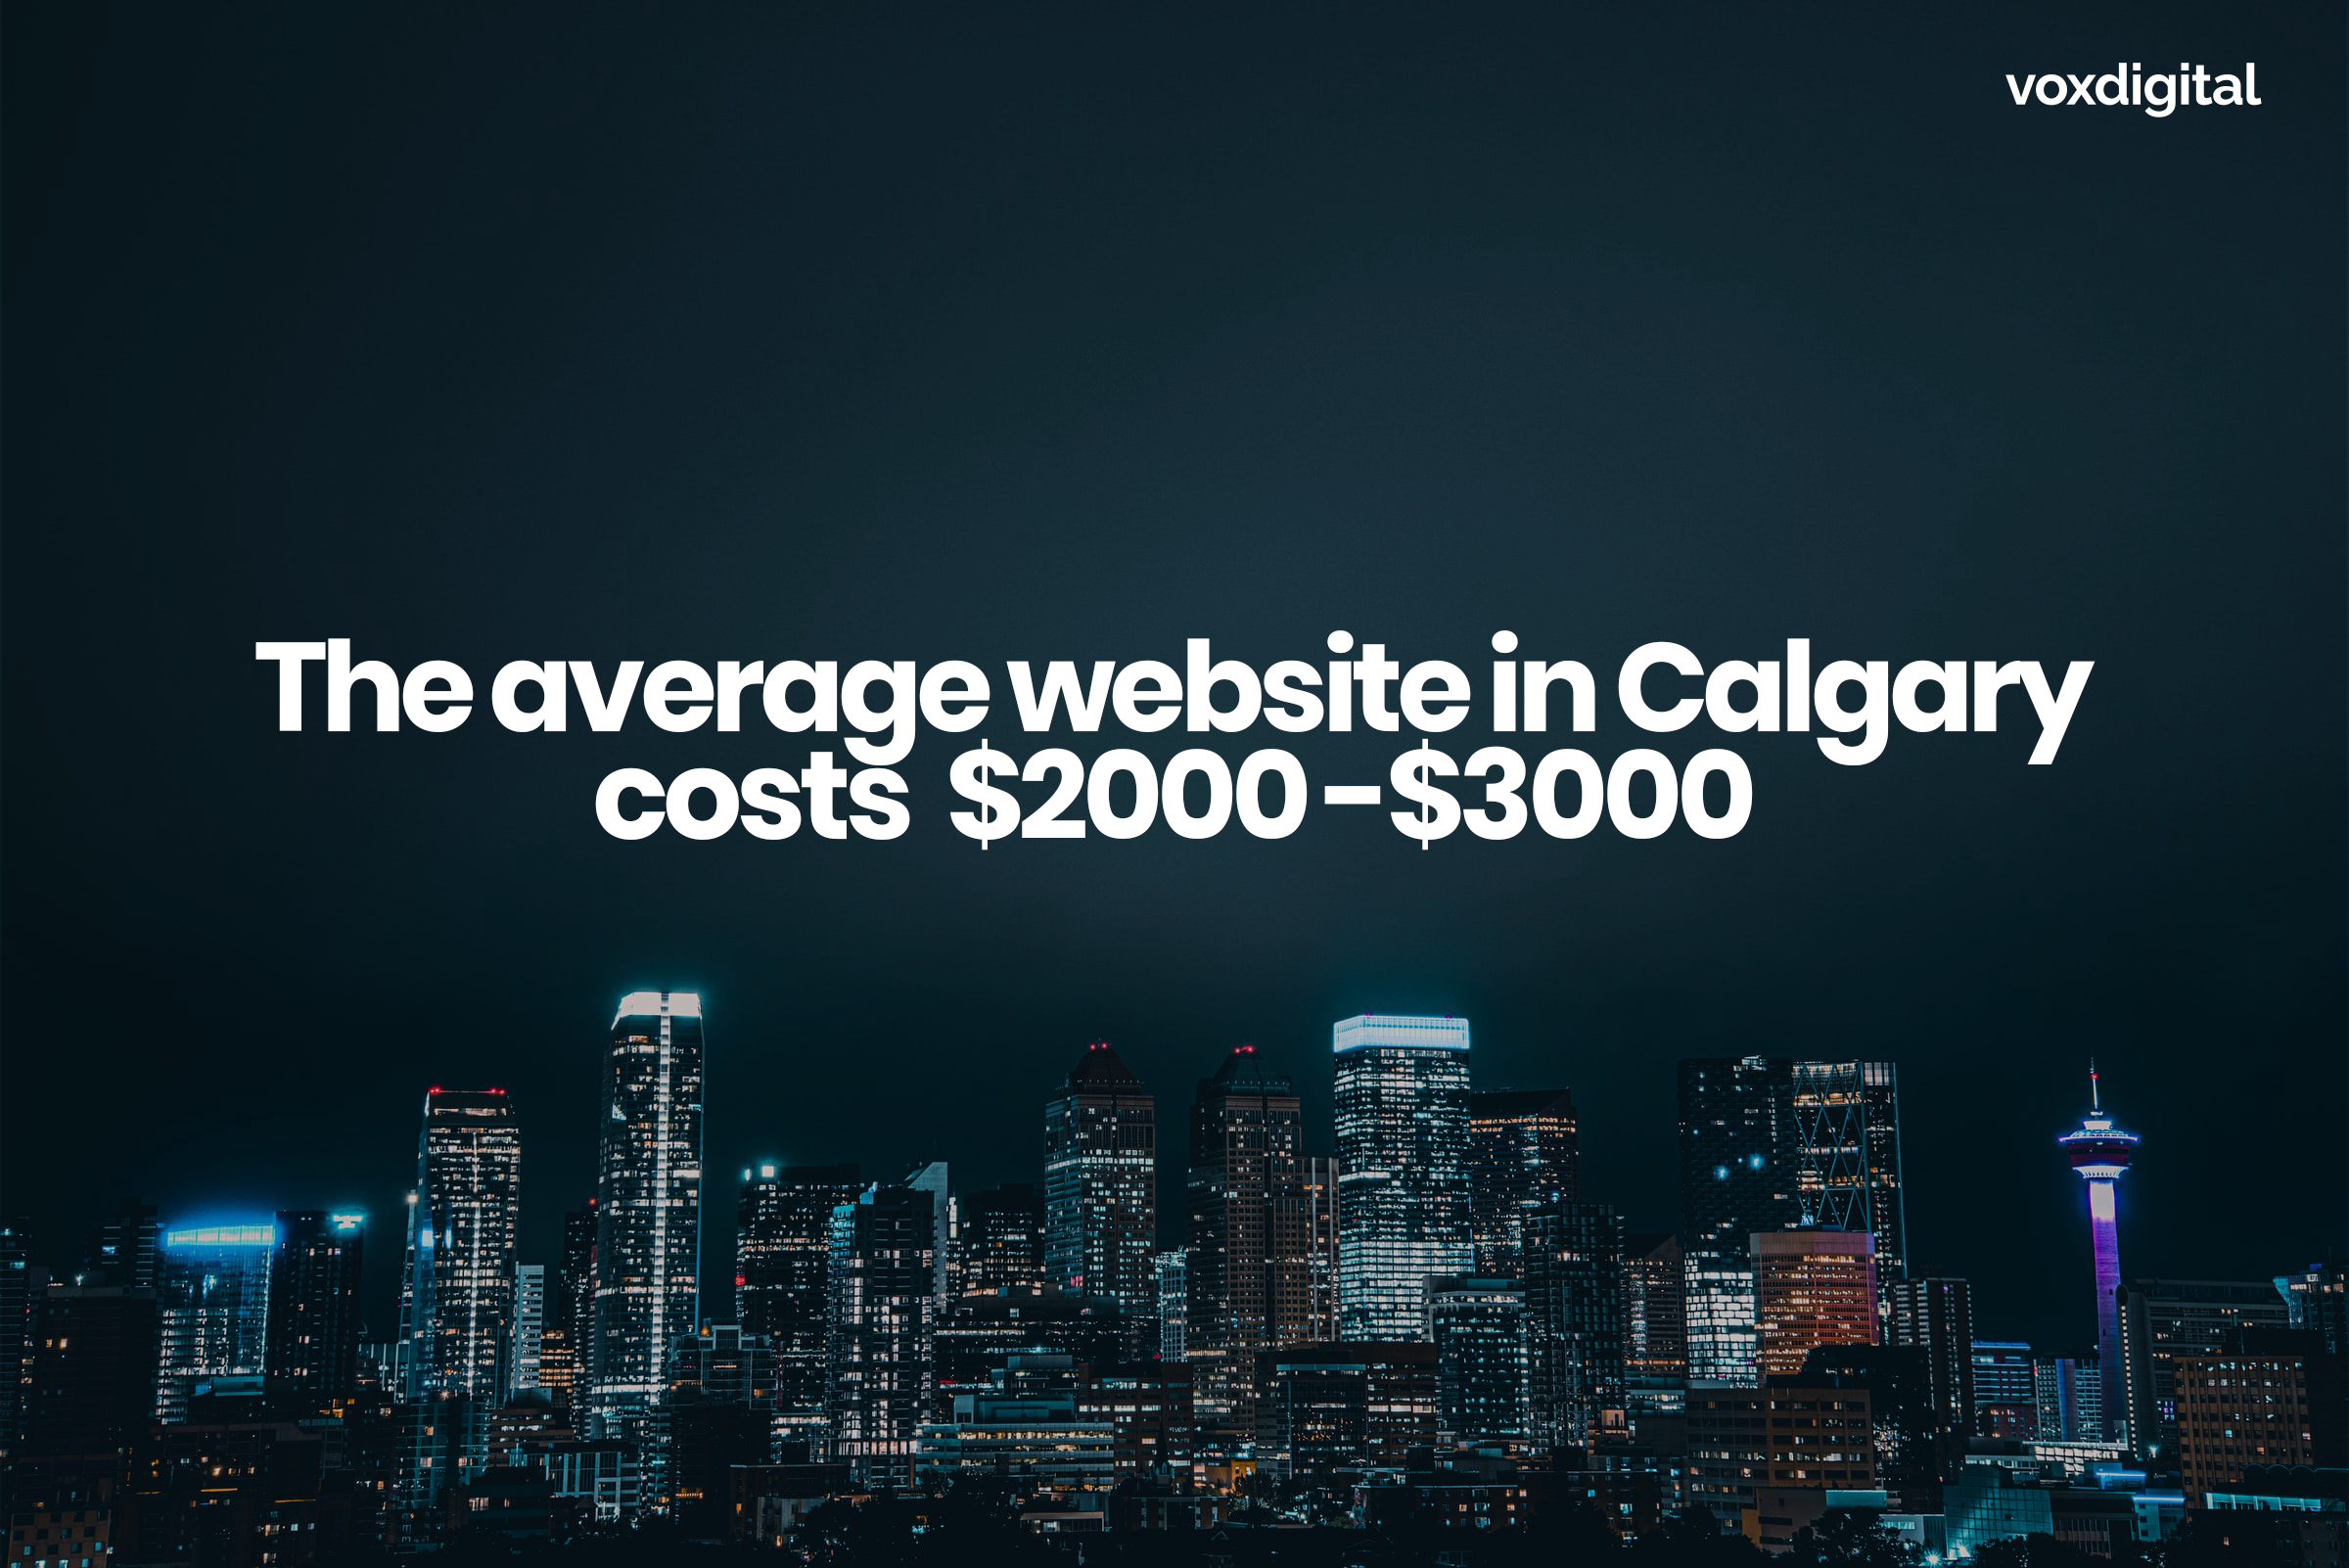 The average website in Calgary costs $2000-$3000